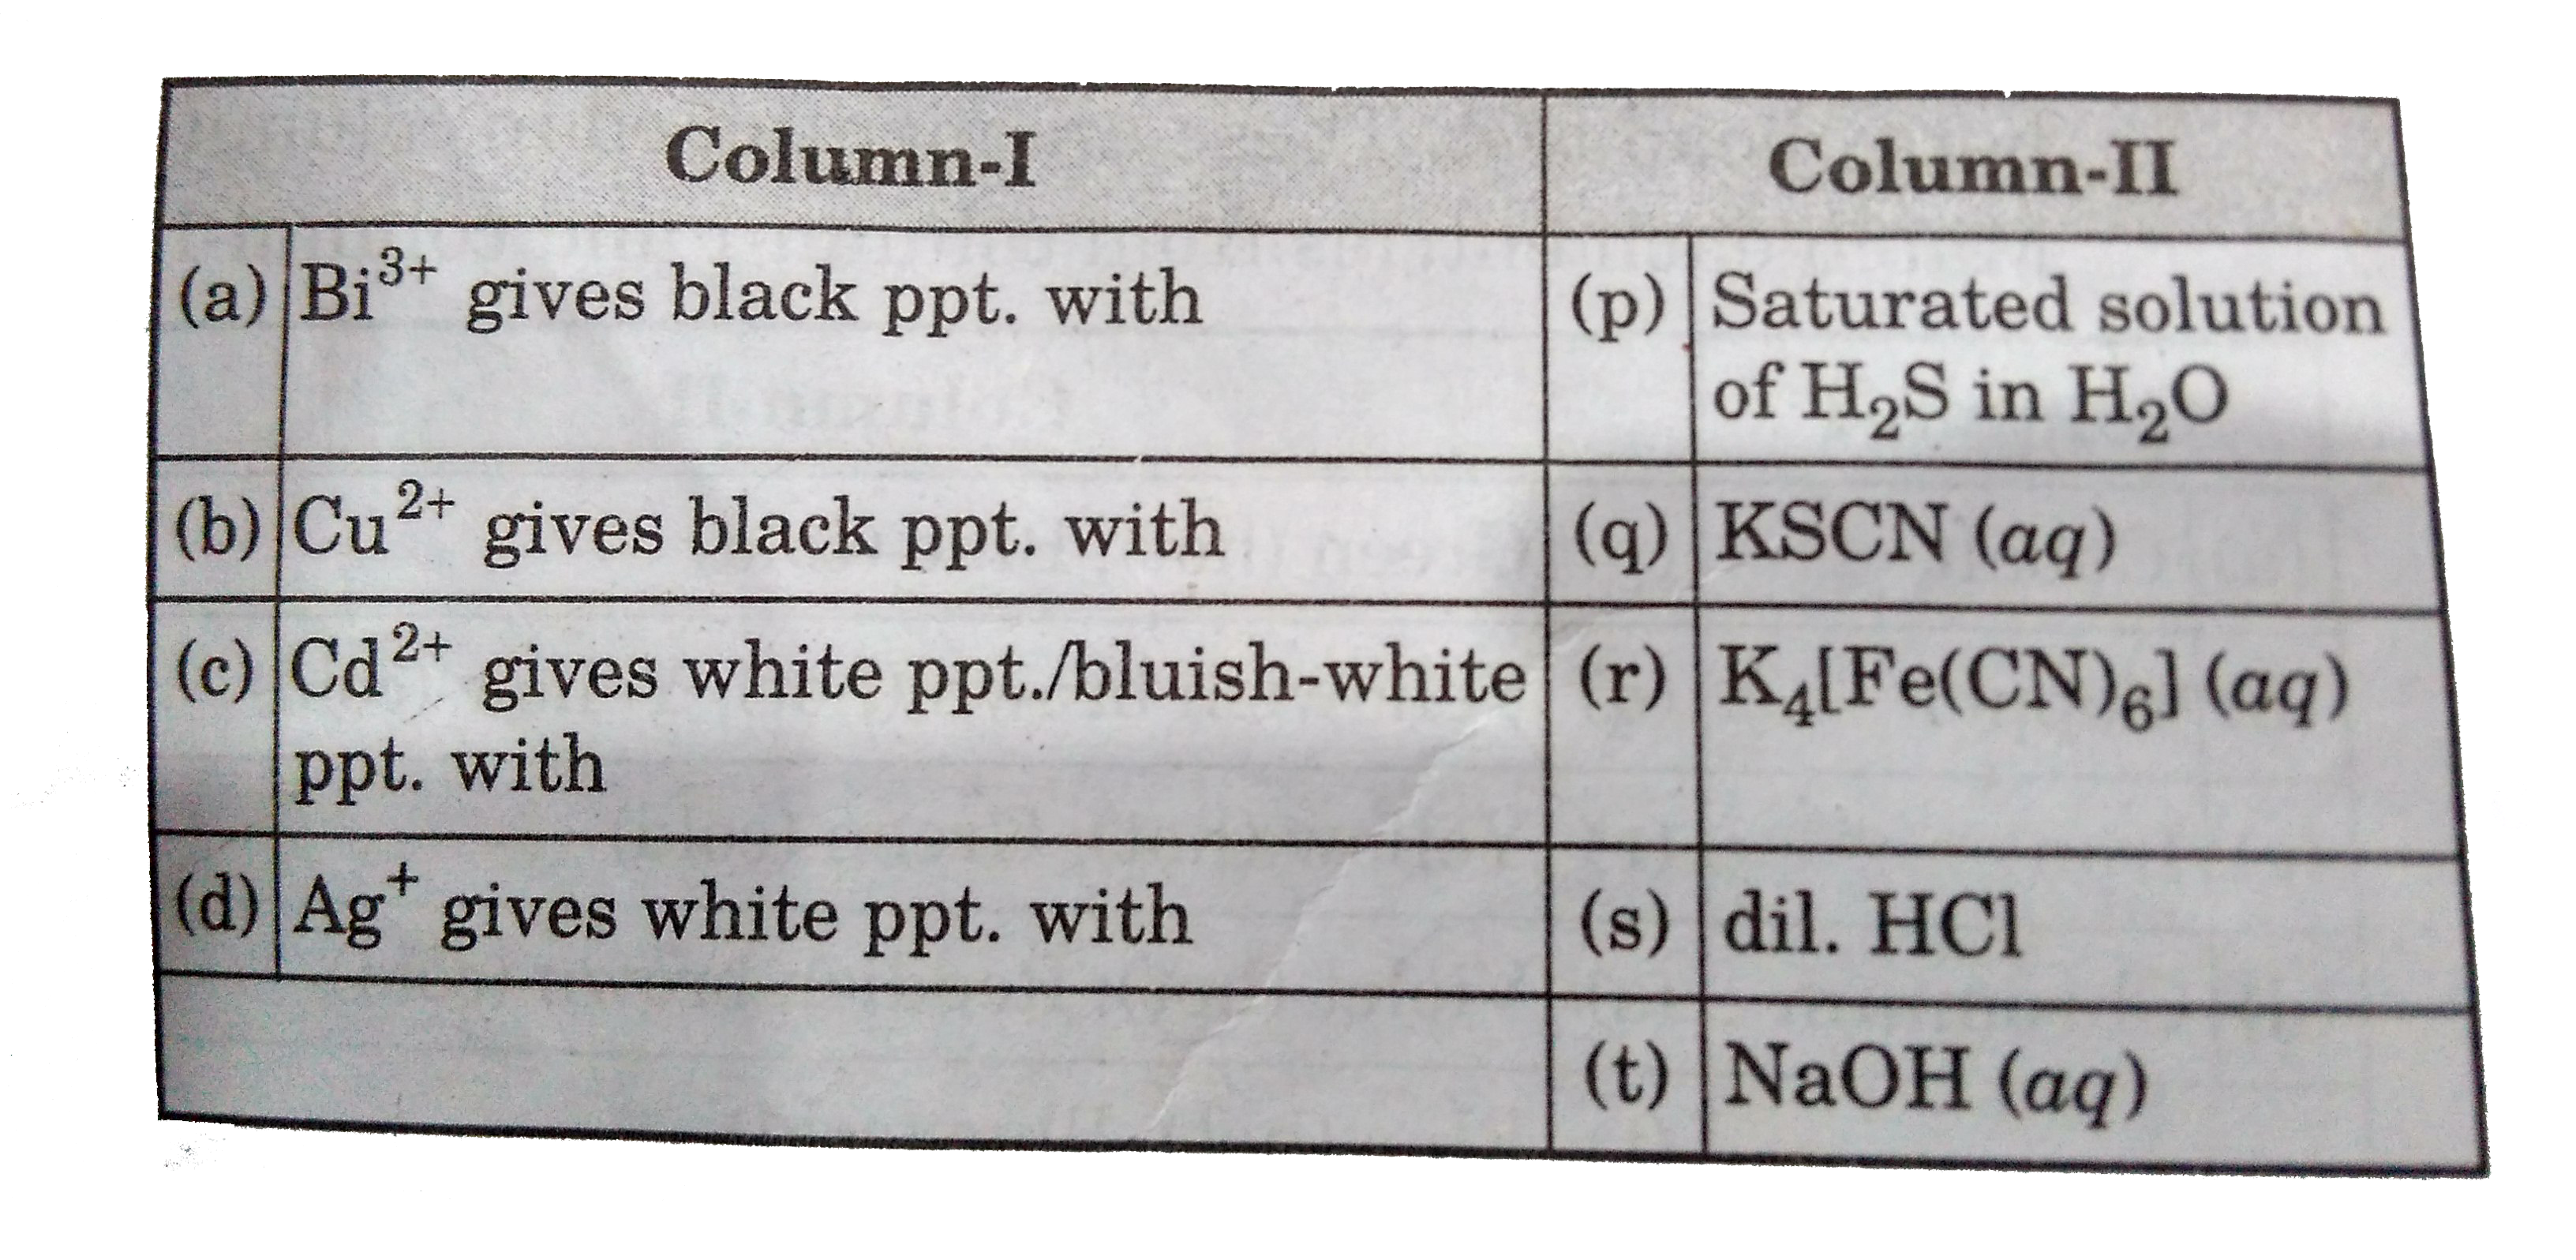 Match the colour of ppt. listed in column-I with the reagent(s) is column-II.